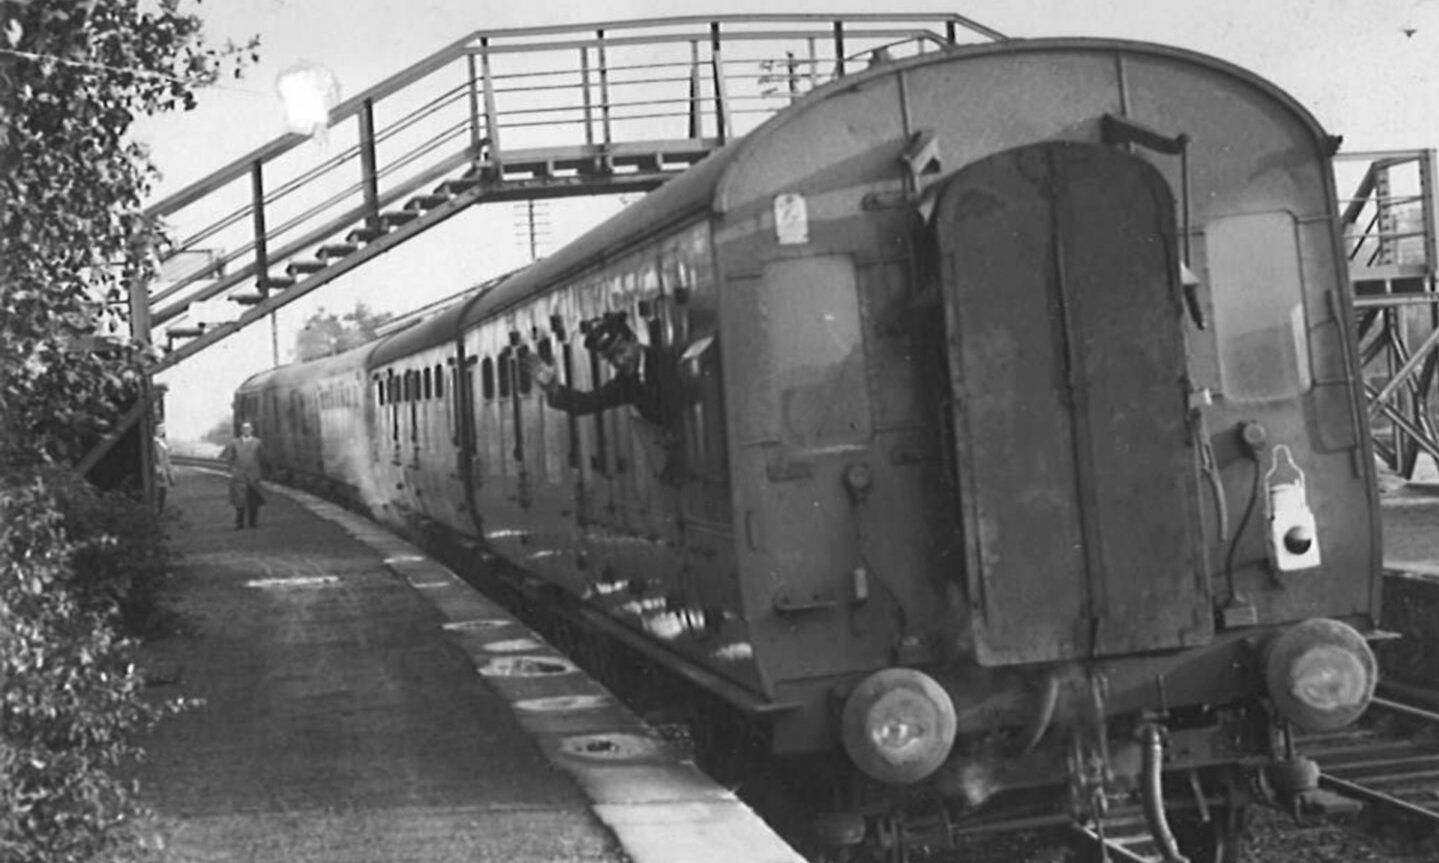 A last glimpse of the Buchan train as it rounds the bend at Ellon Station on its final journey in 1965